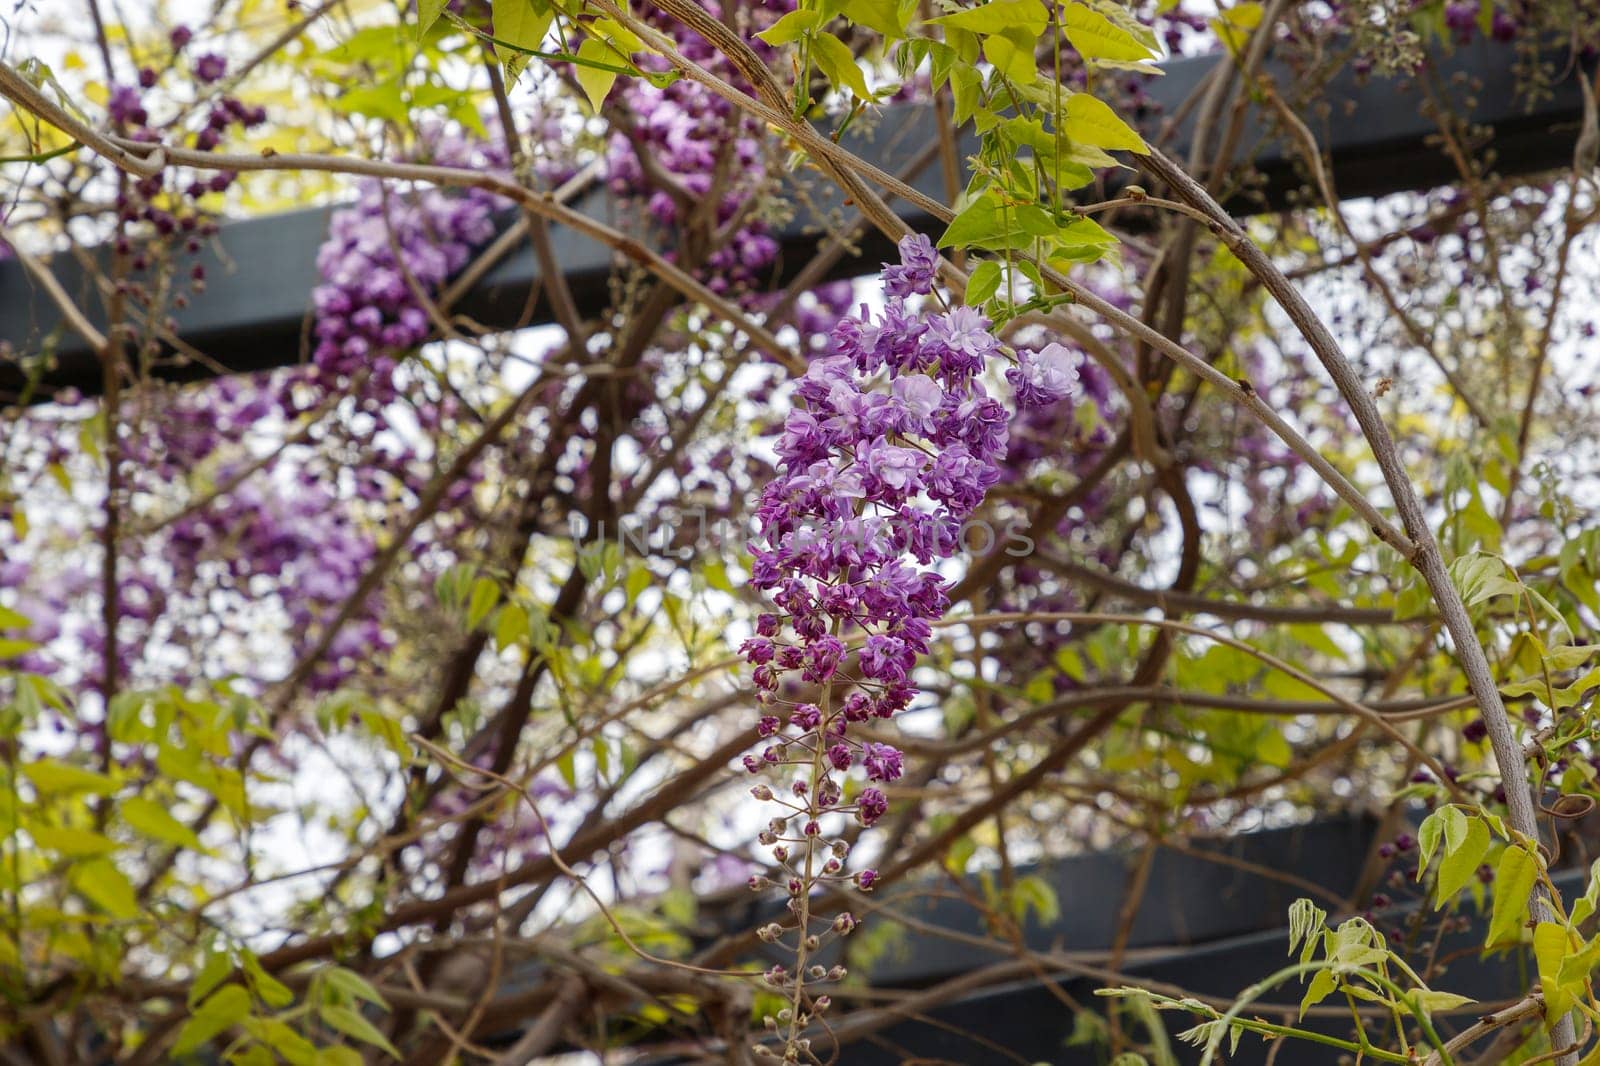 The wisteria flowers that bloom from overhead are so fantastic that they symbolize early summer in Japan.